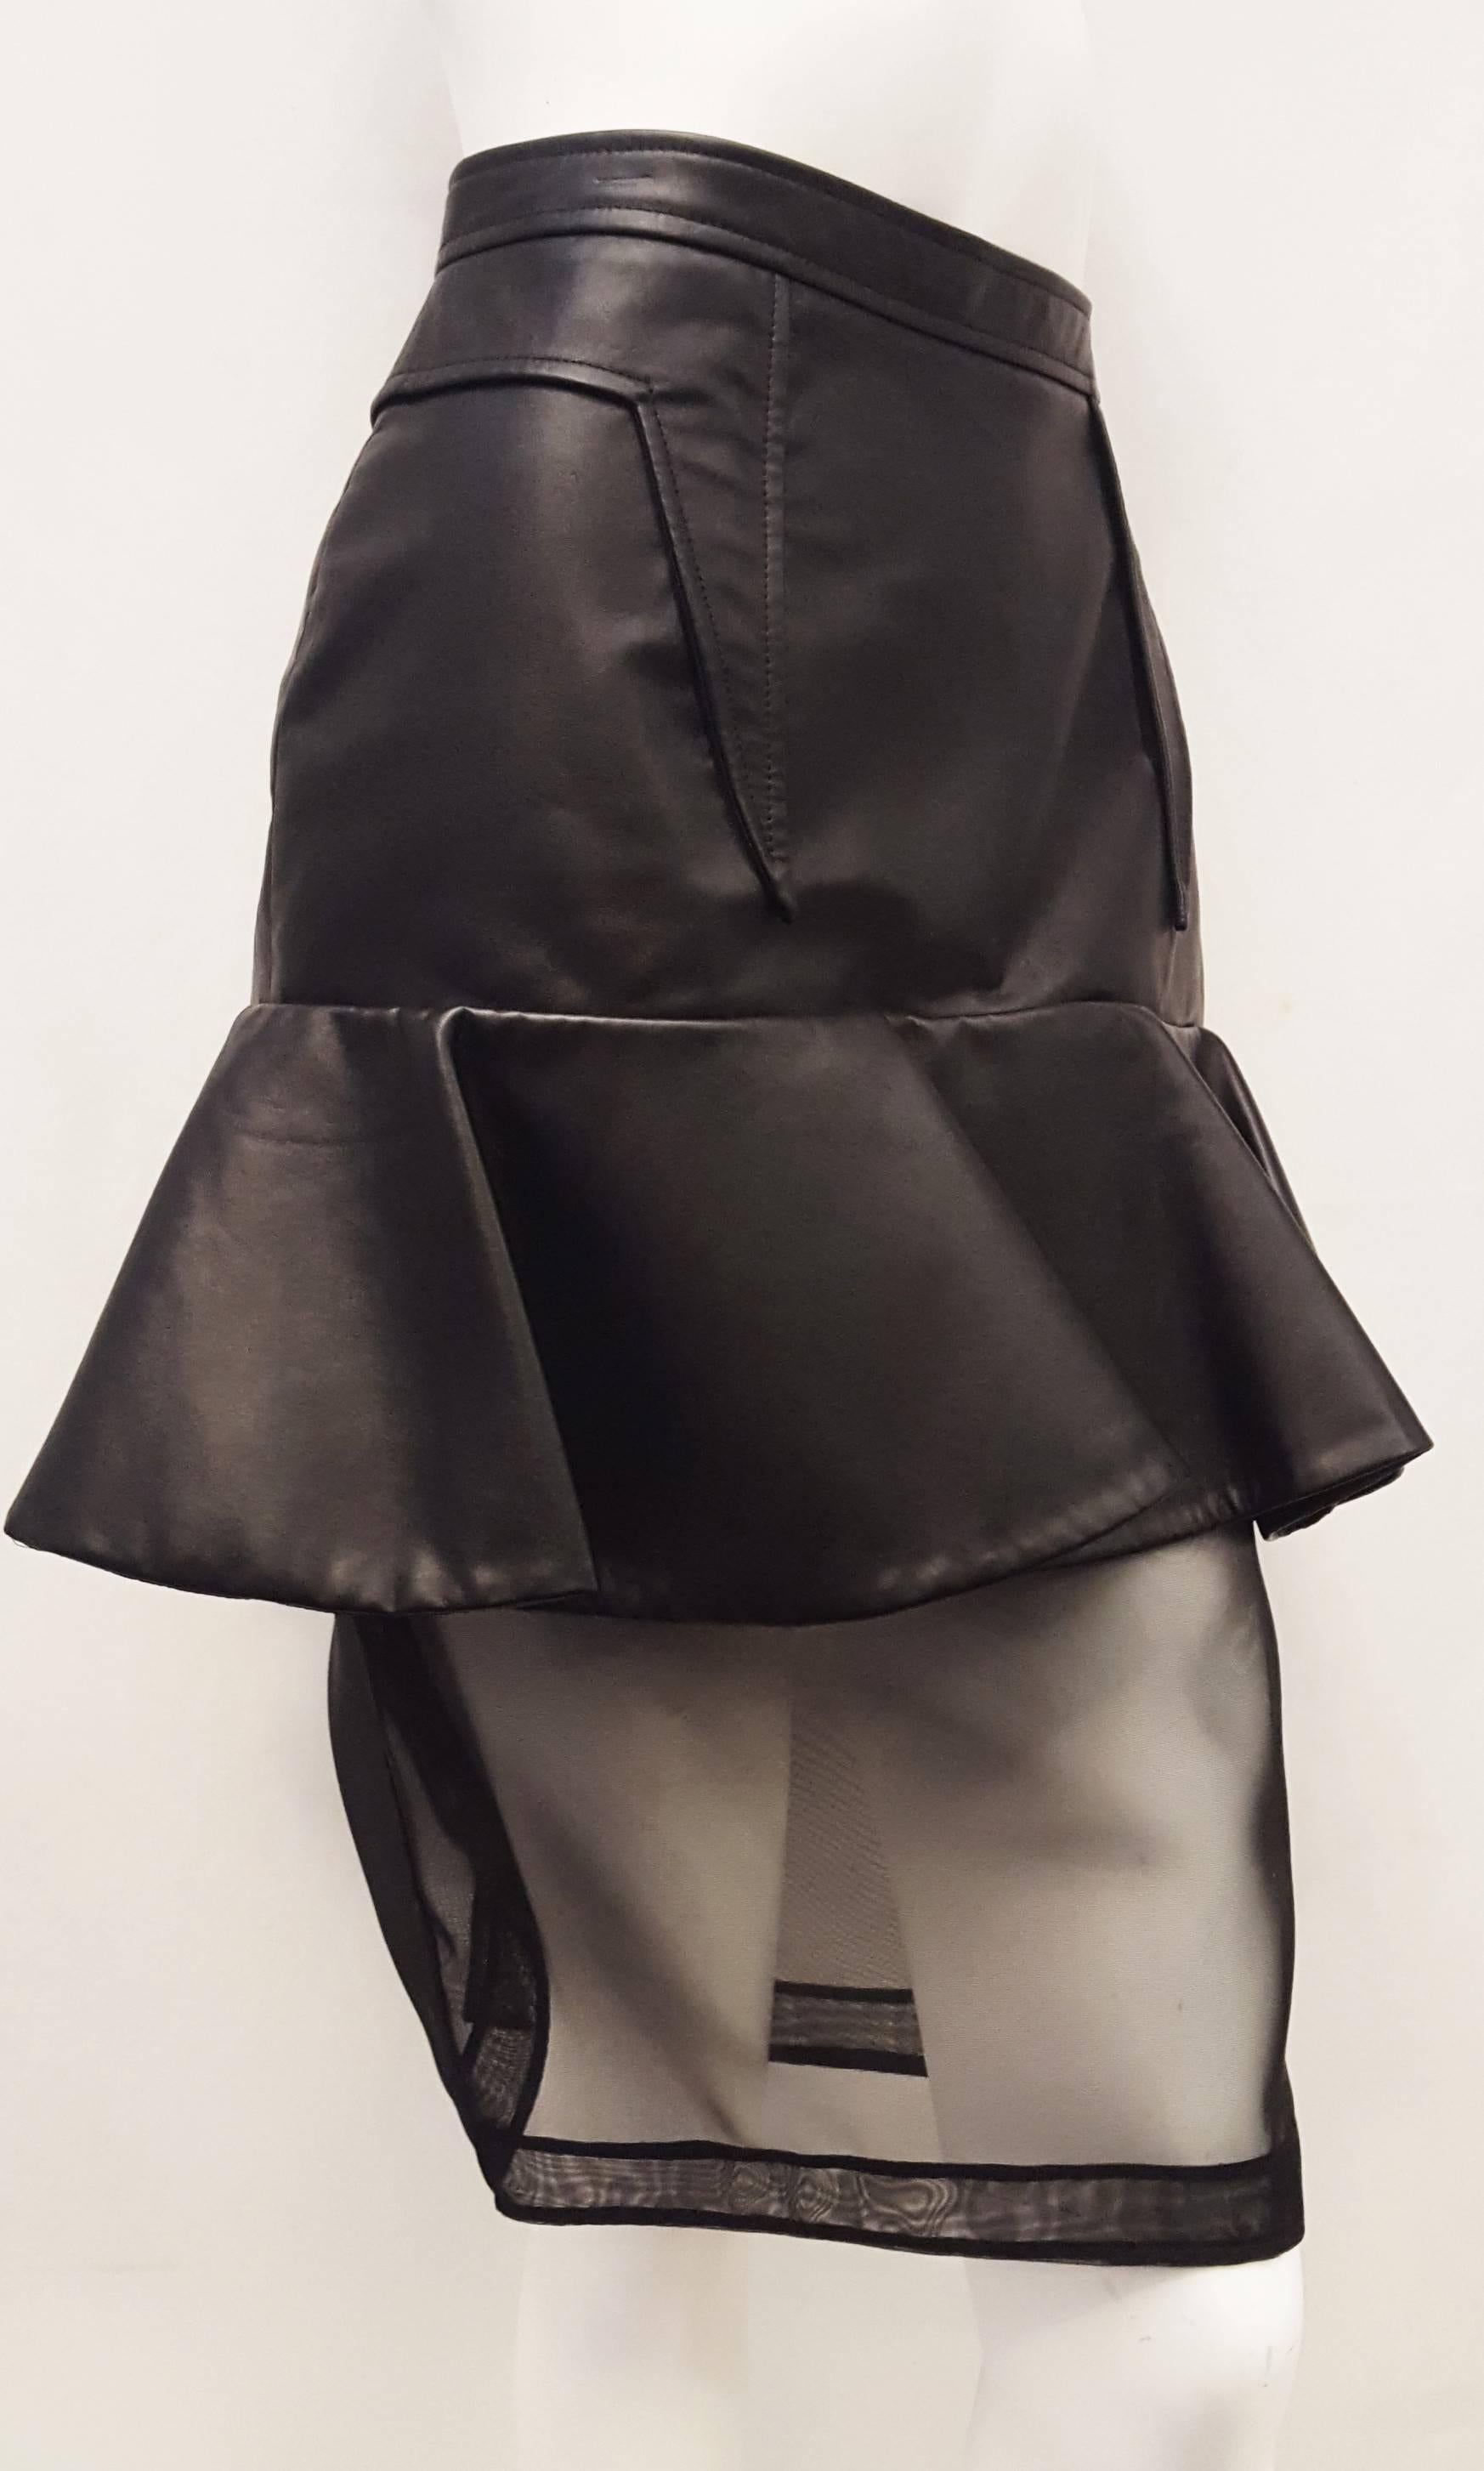 Givenchy features a unique black leather skirt tight to hip with one 7 inch ruffle all around for additional flare.  Below the ruffle is a pencil skirt with see-through mesh underskirt and a rear slit. The front and back contain darts that come down